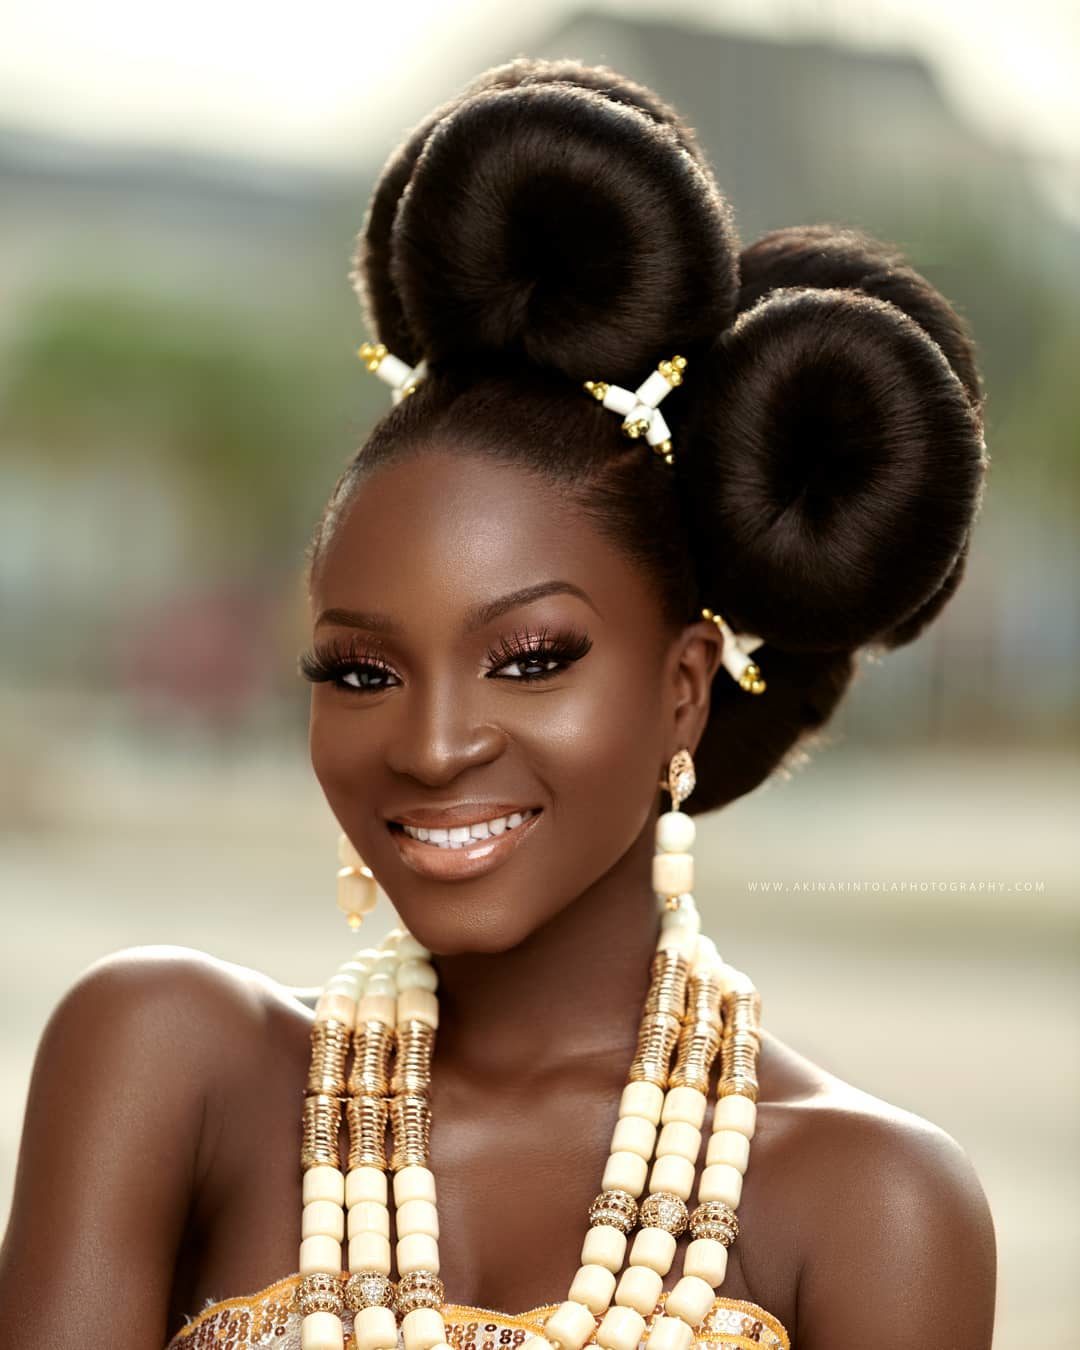 12 Easy And Beautiful Hairstyles To Consider This Festive Season